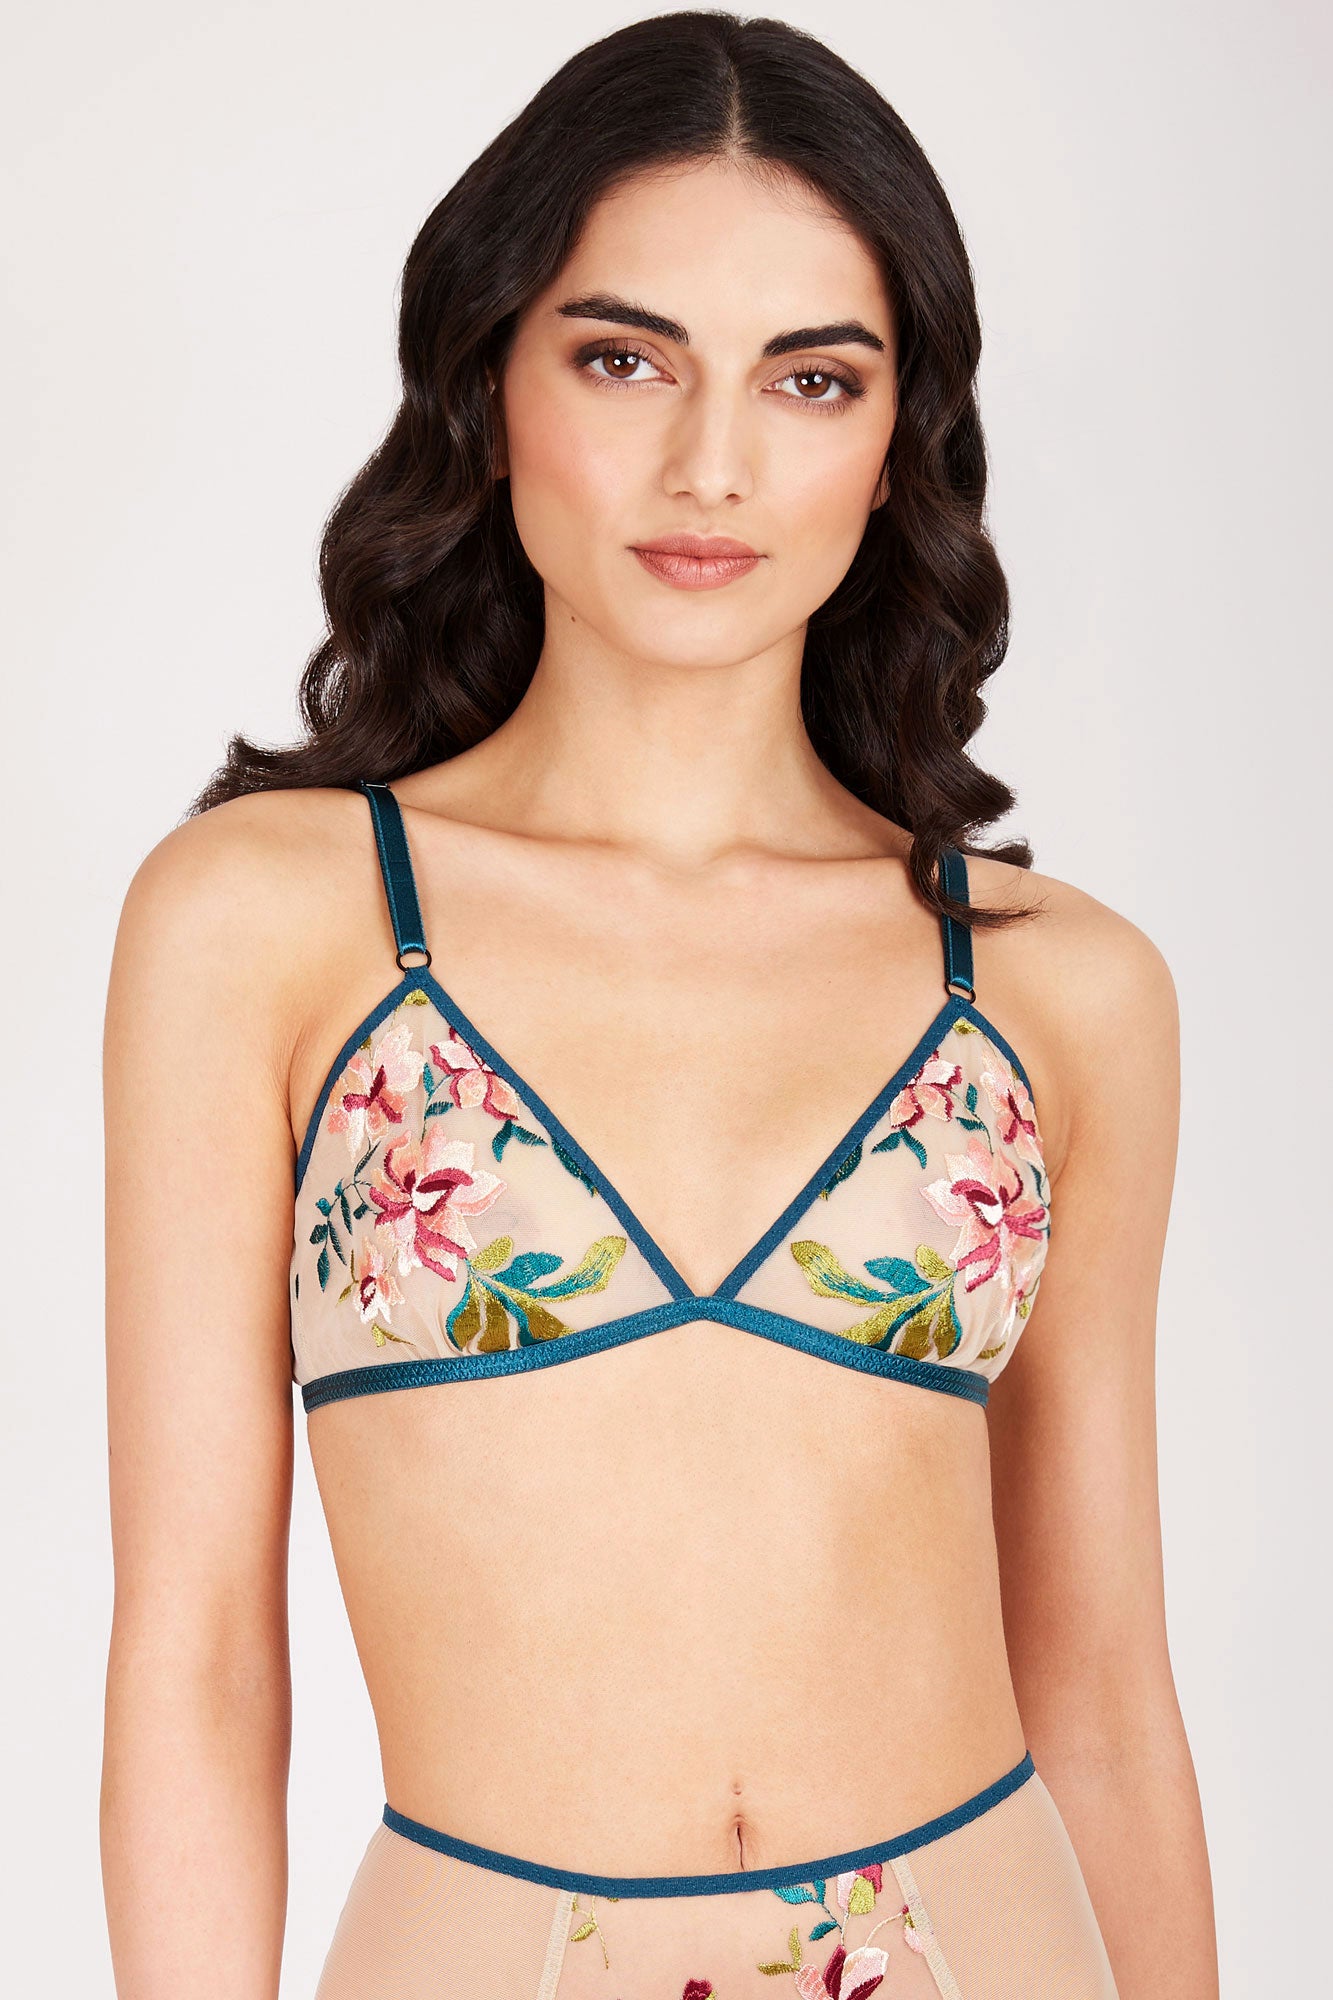 Camellia bralette with floral embroidery over the sheer cups